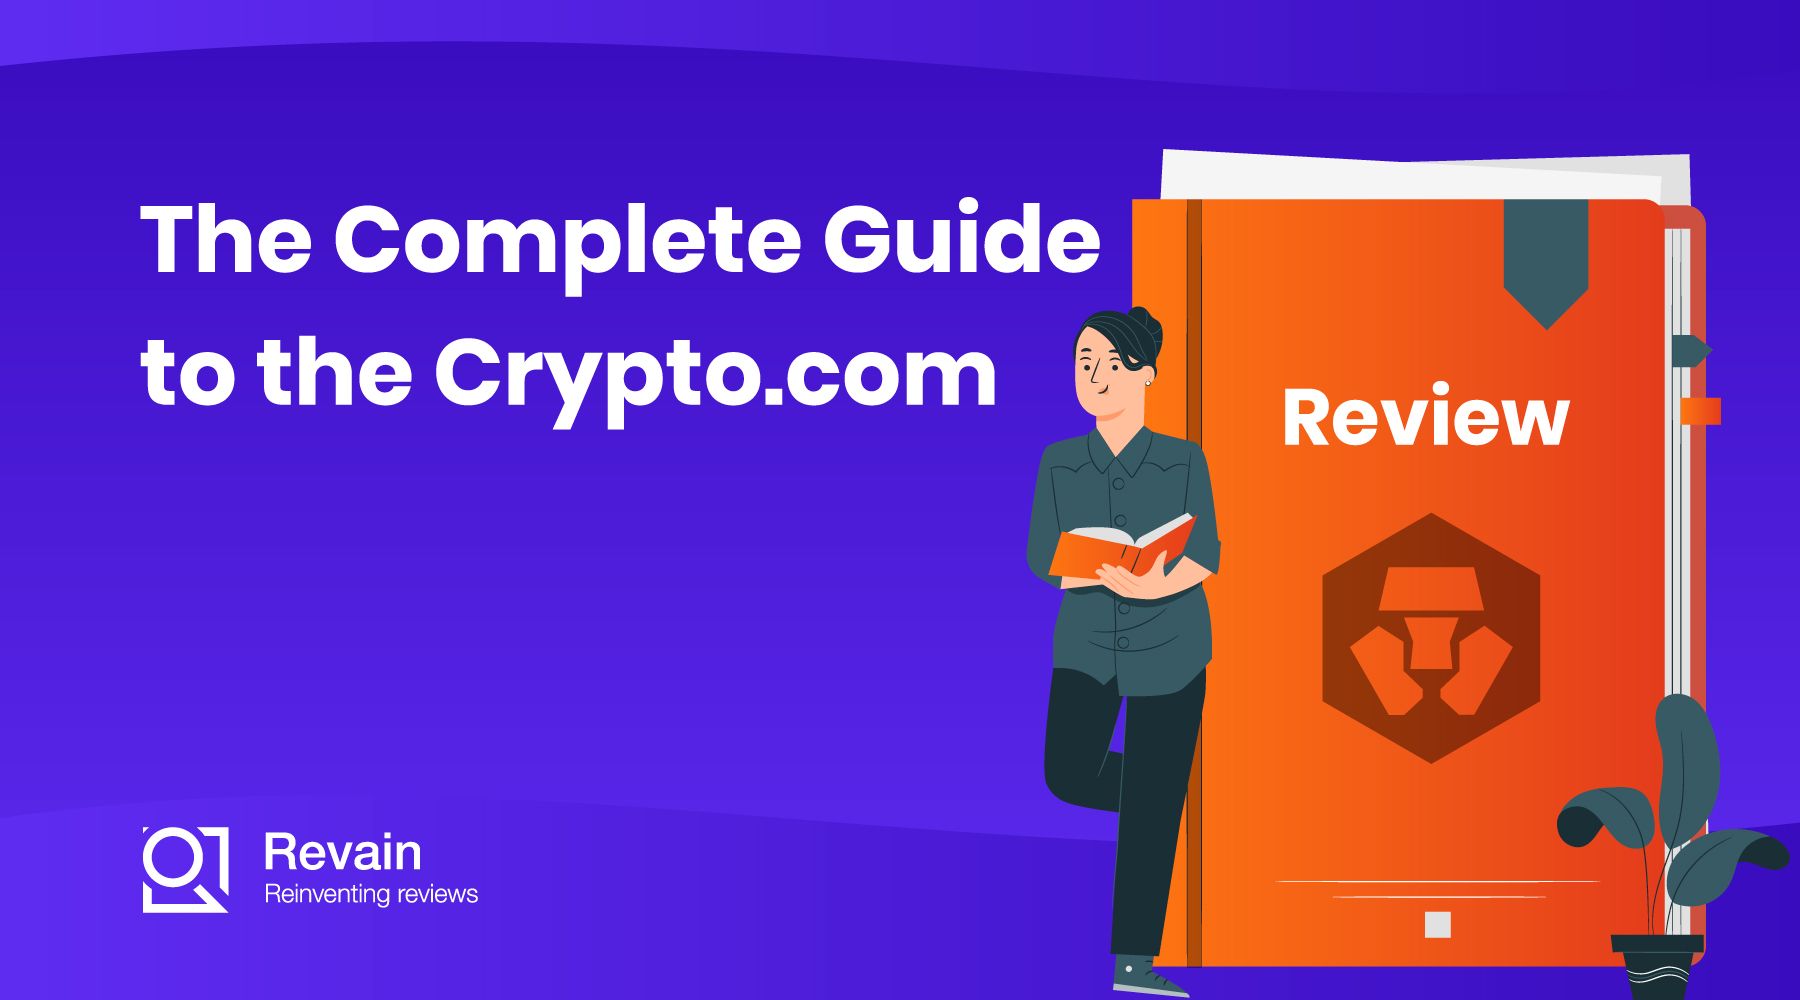 Article The Complete Guide to the Crypto.com